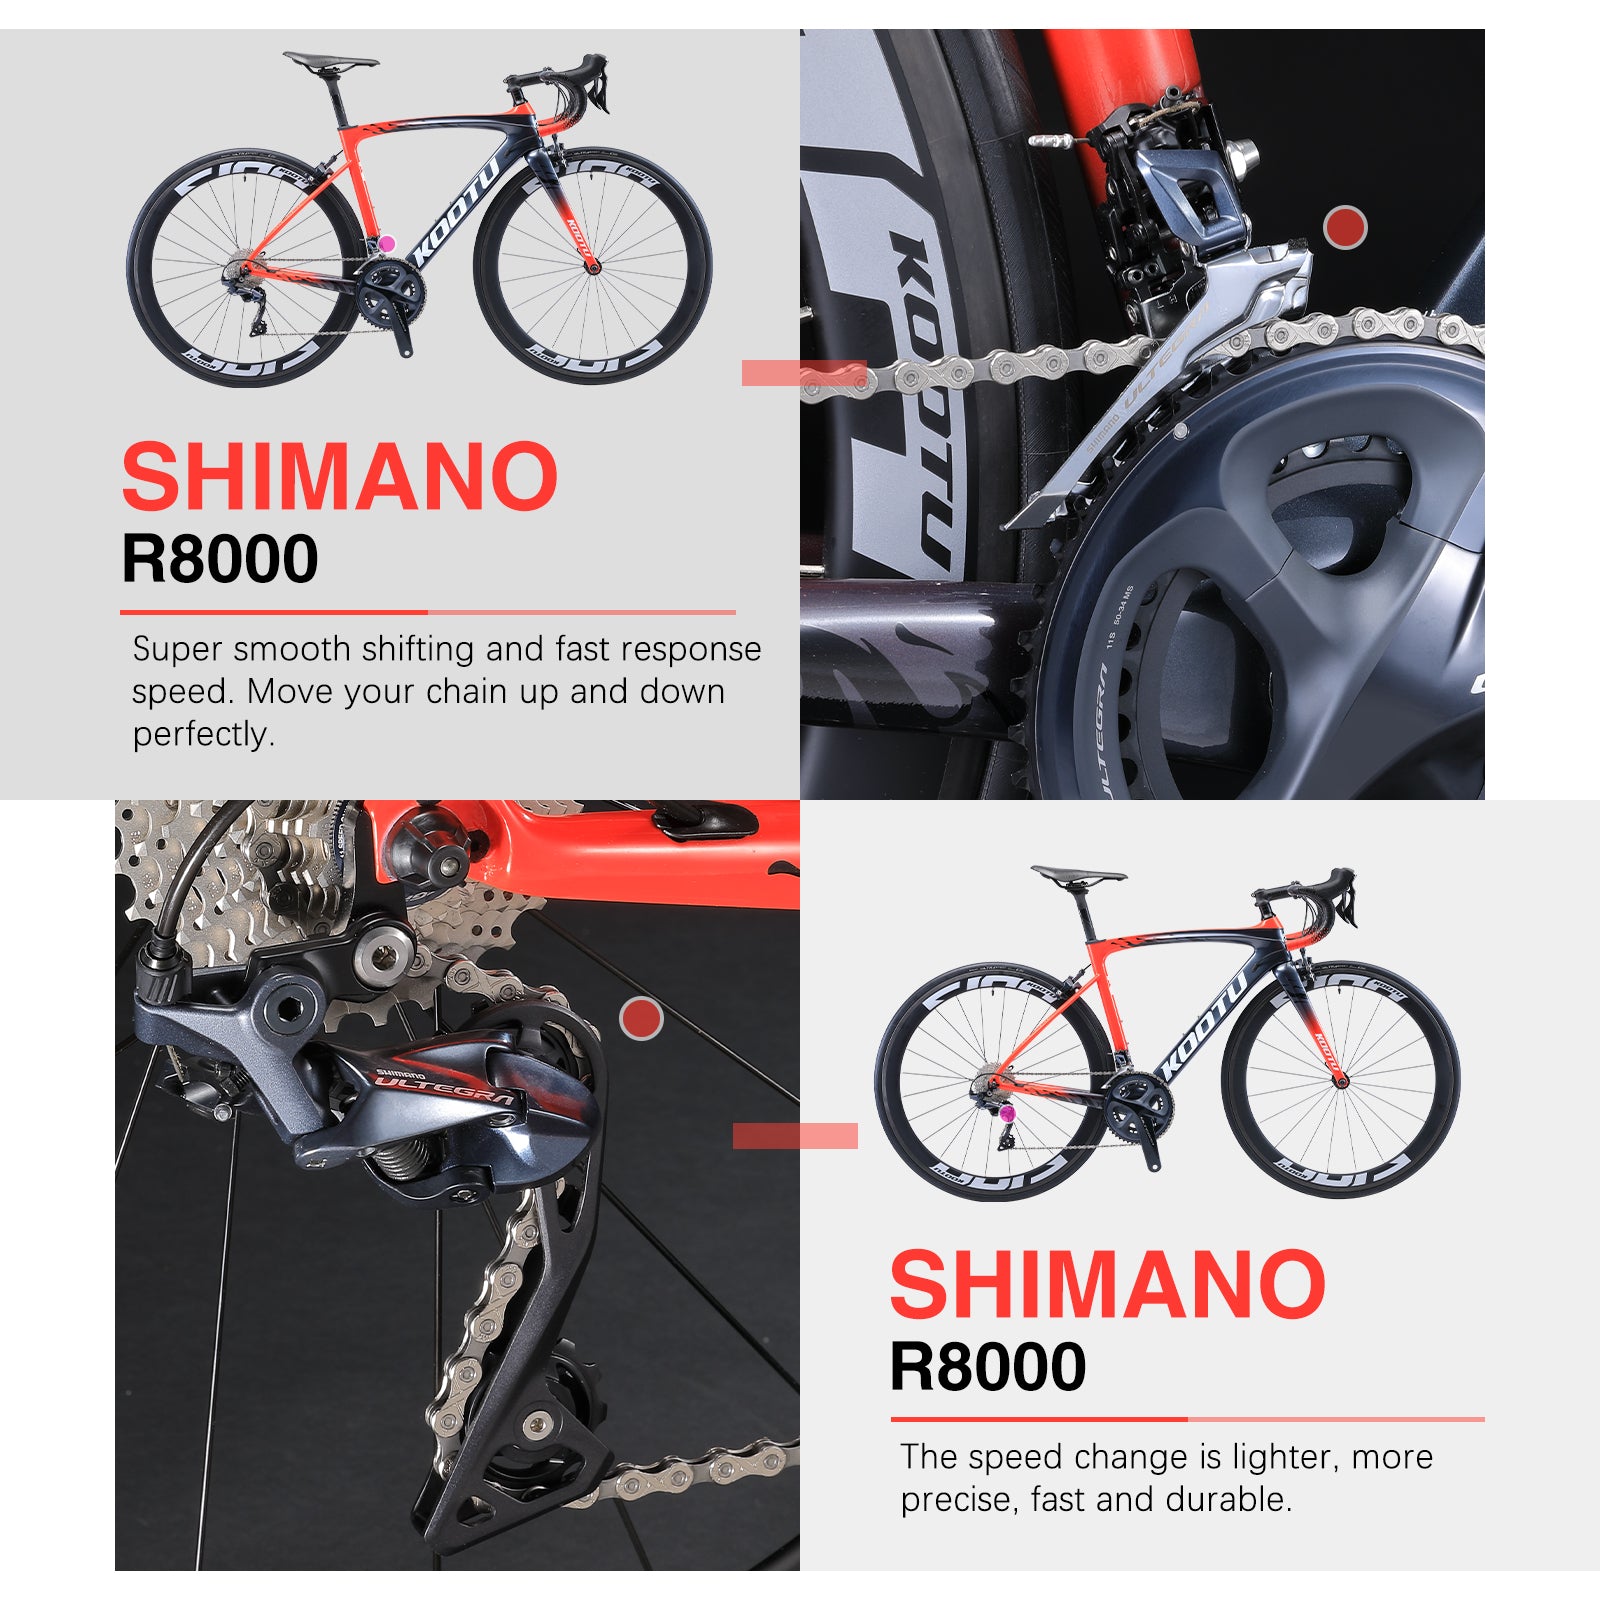 shimano r8000 derailleur system-kootu r03 carbon road bike with shimano ultegra r8000 groupset